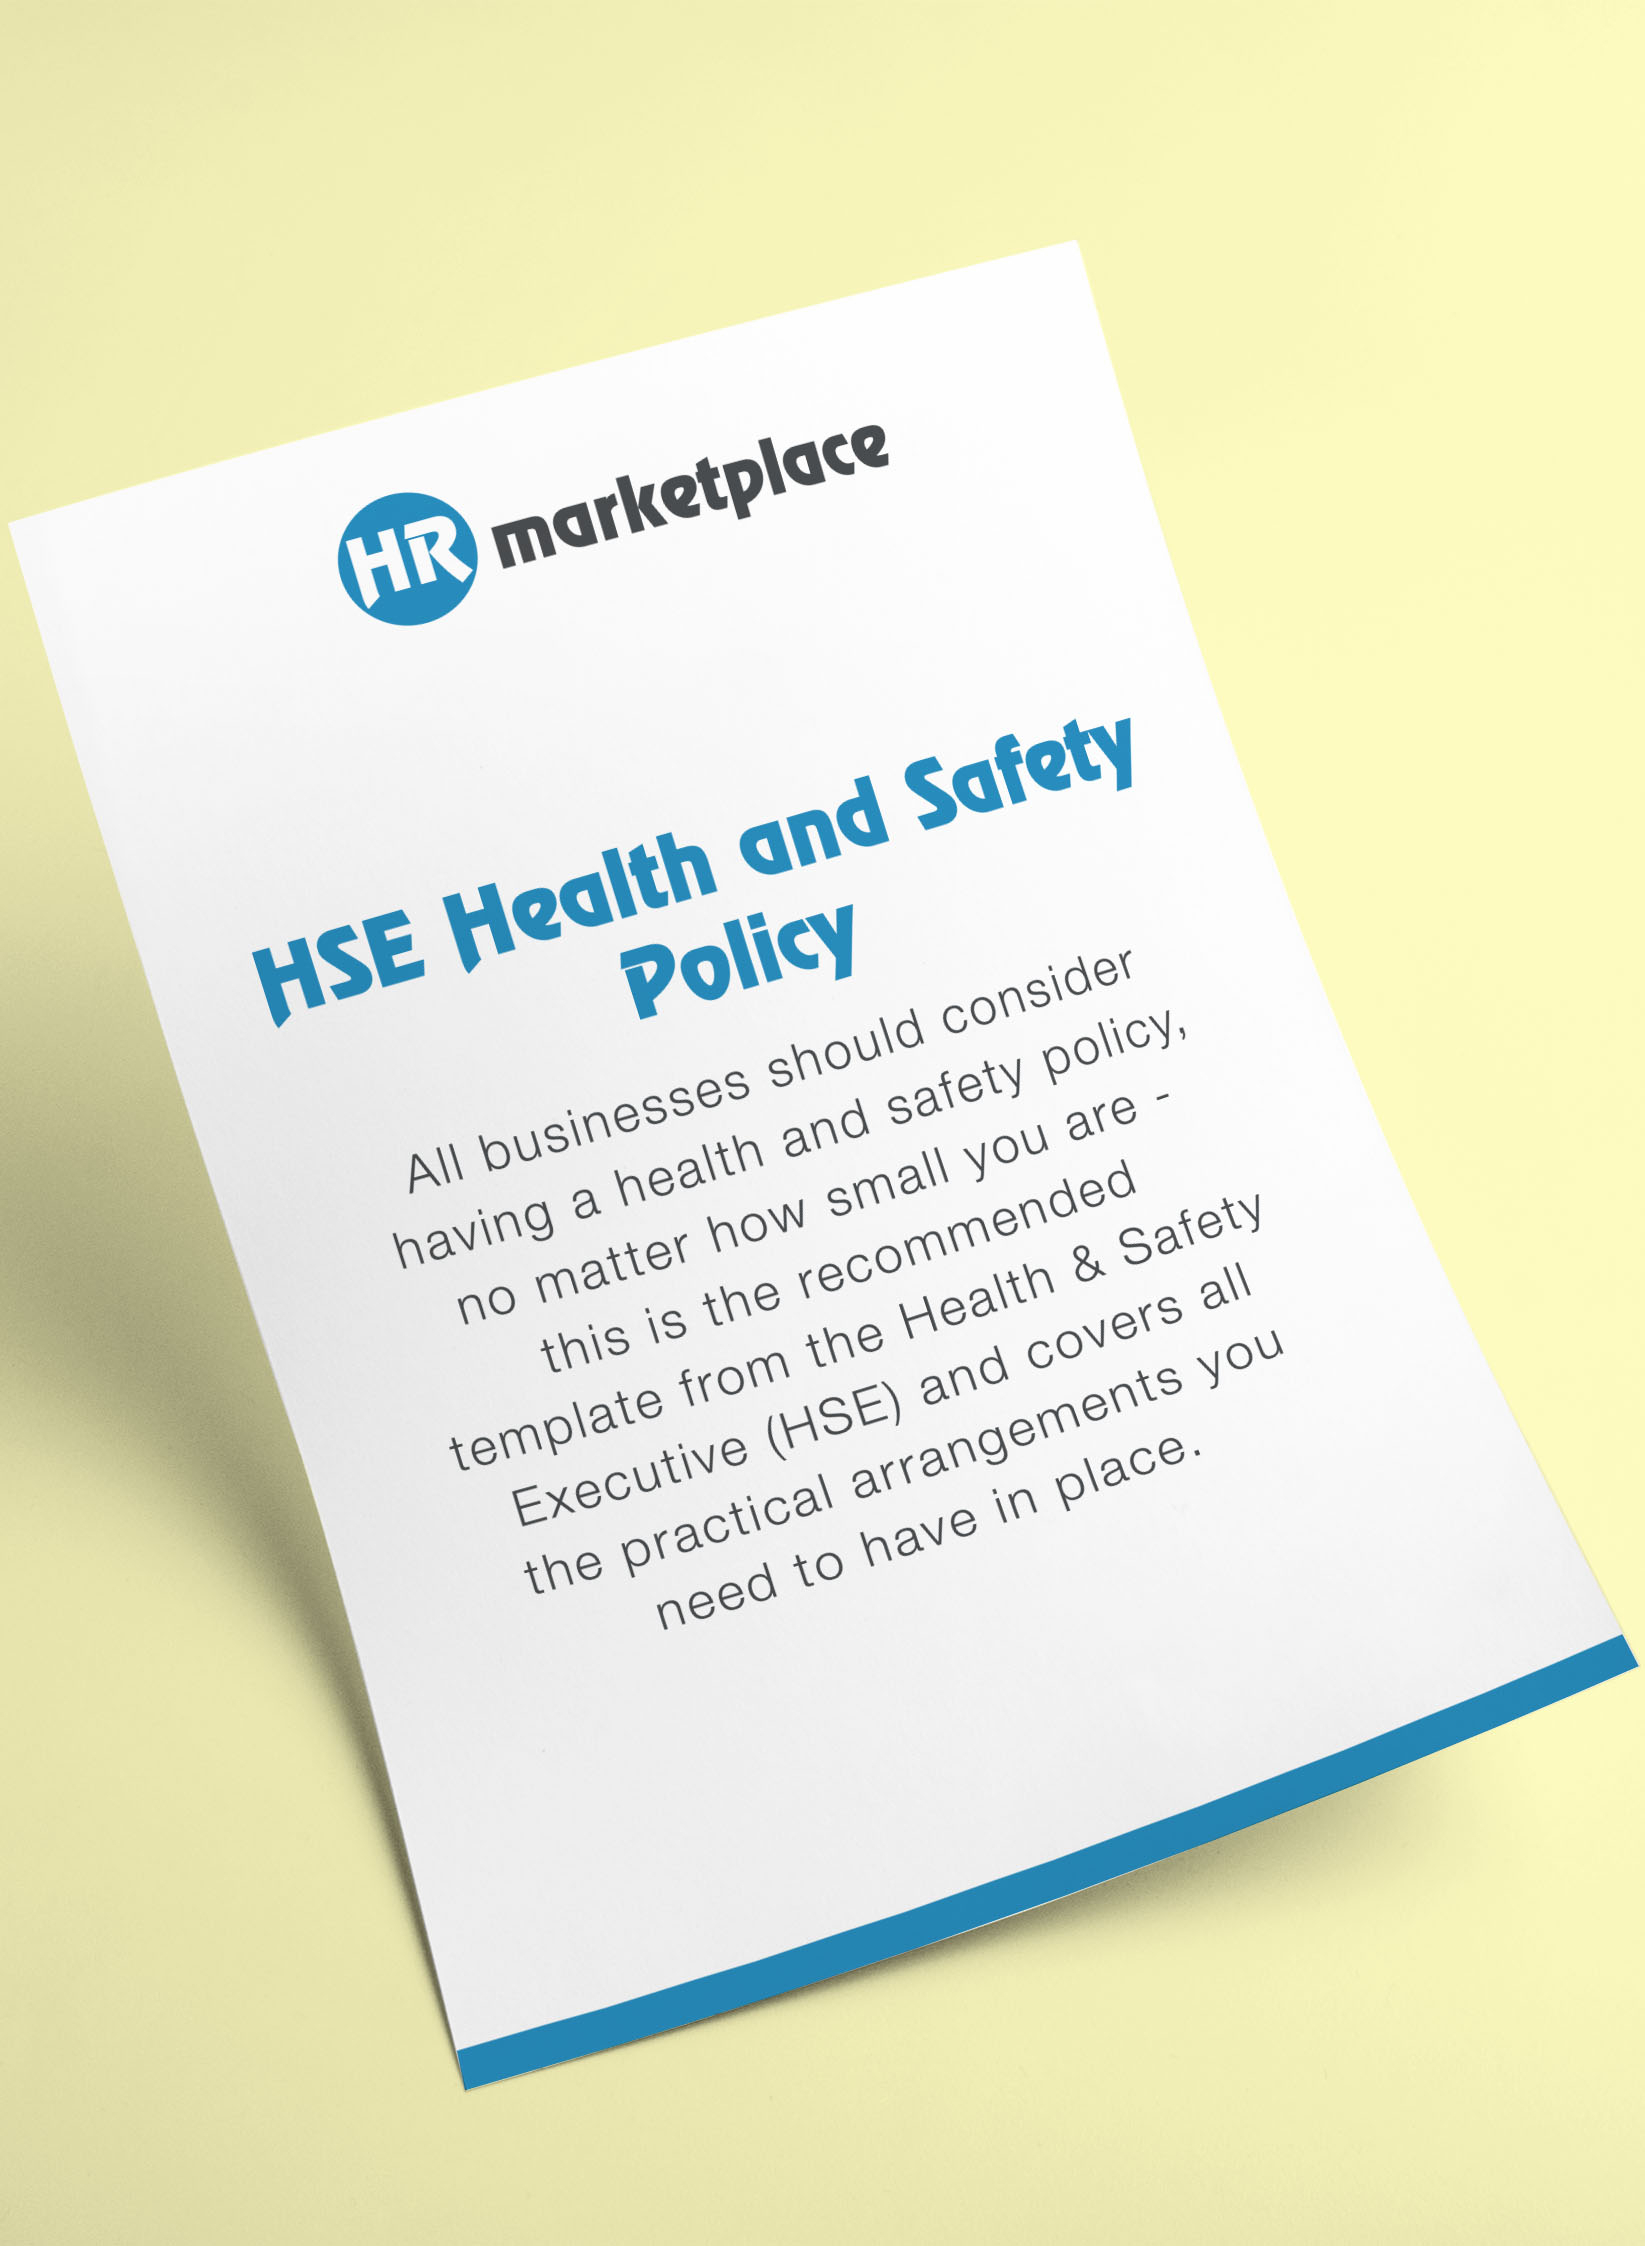 Hse Health And Safety Policy | Hr Marketplace – A One Stop In Health And Safety Policy Template For Small Business